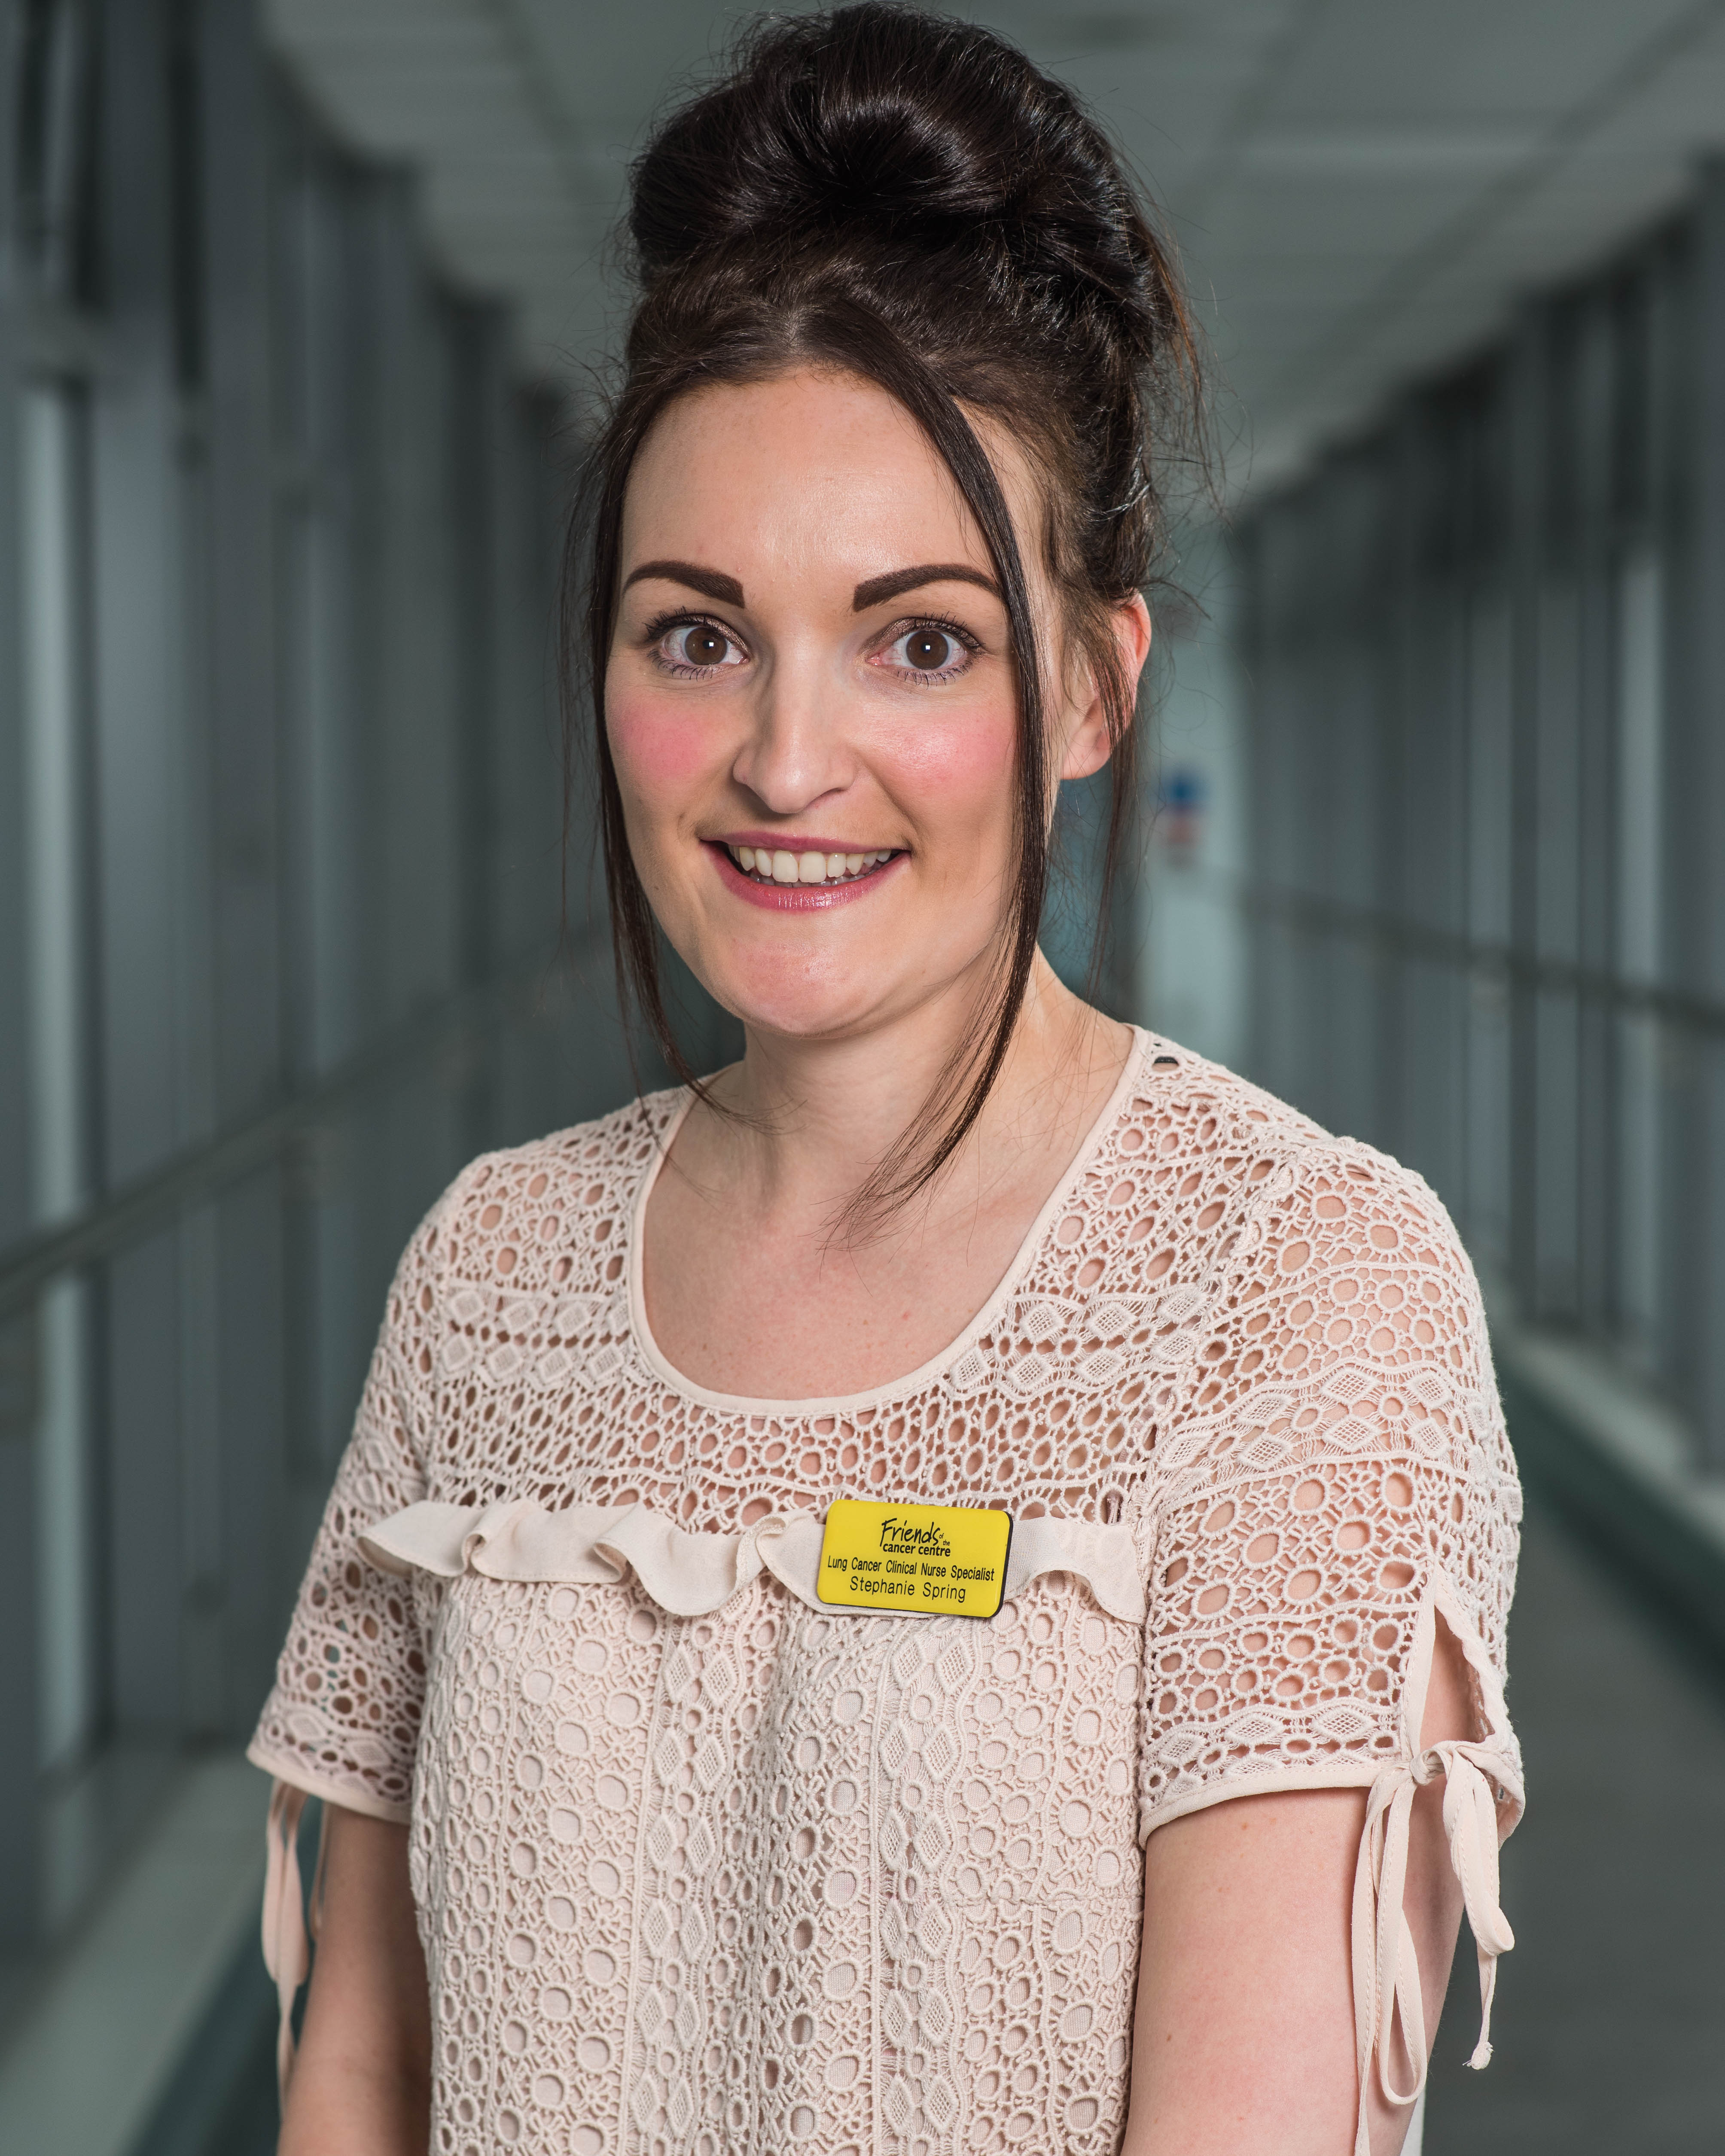 HERO: Friends of the Cancer Centre’s Lung Cancer Clinical Nurse Specialist, Stephanie Todd, who has not only provided vital support for her patients but has also helped support COVID-19 care over the past year.